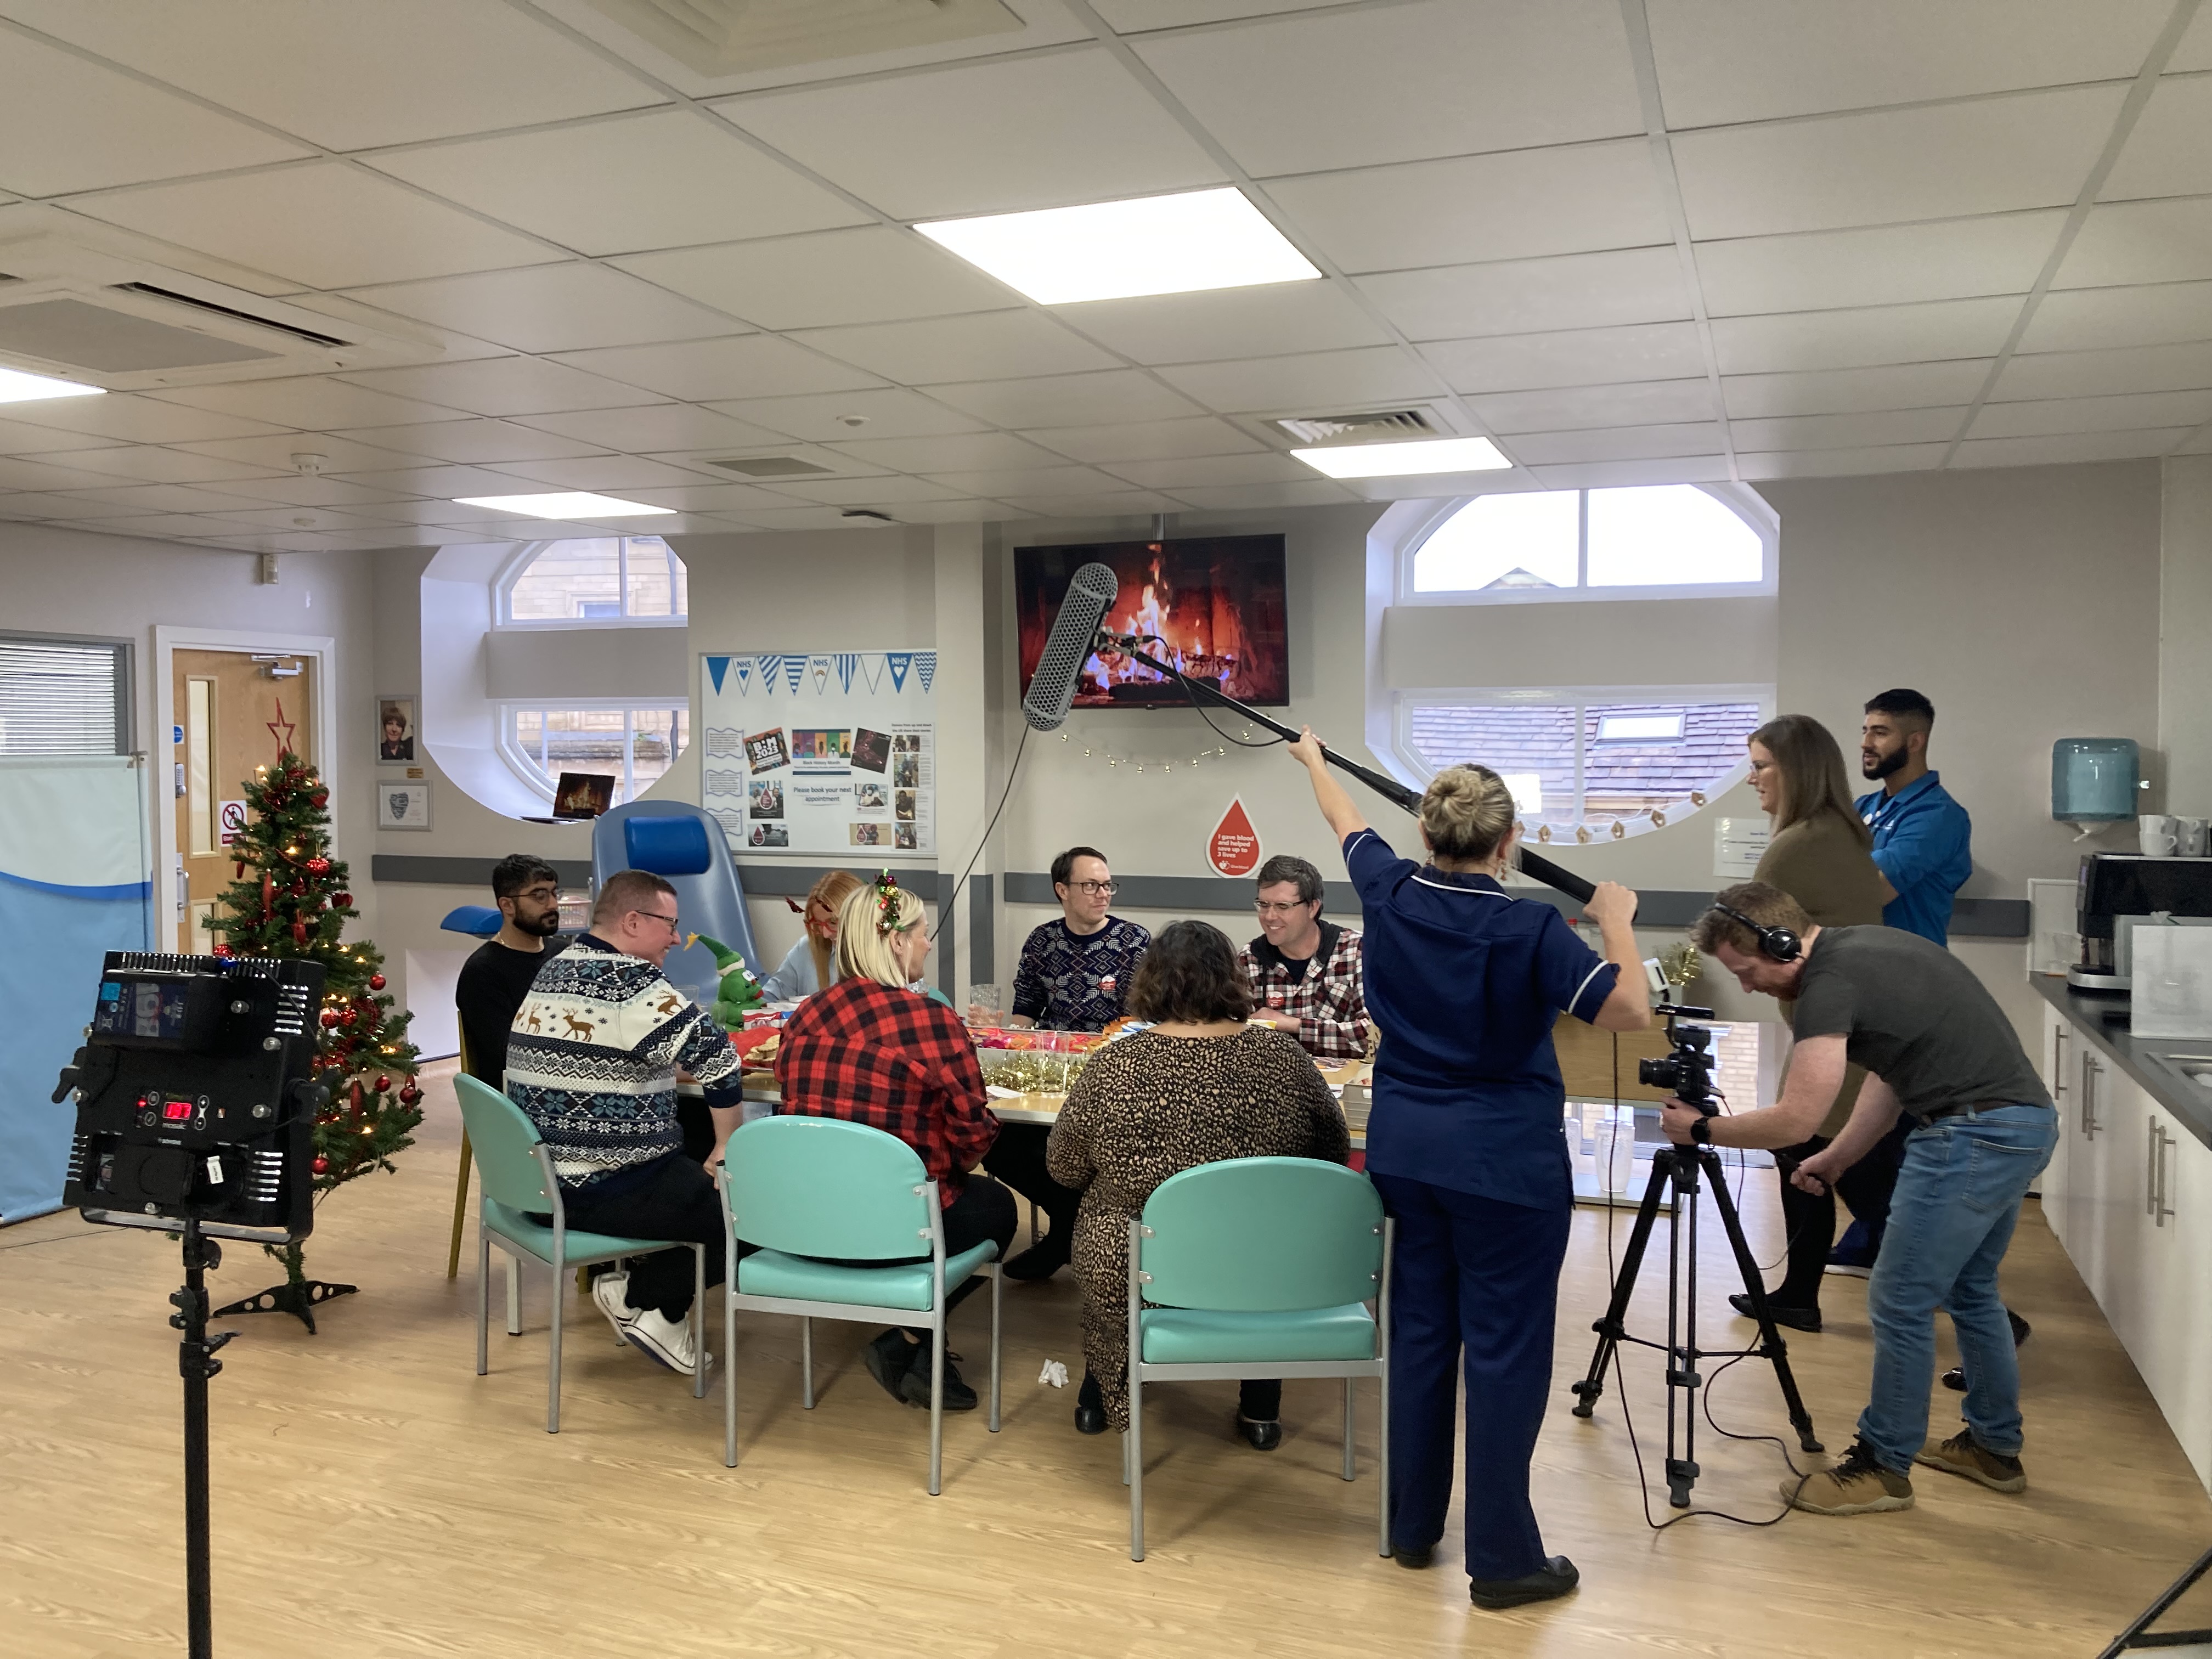 Filming taking place at Bradford Donor Centre